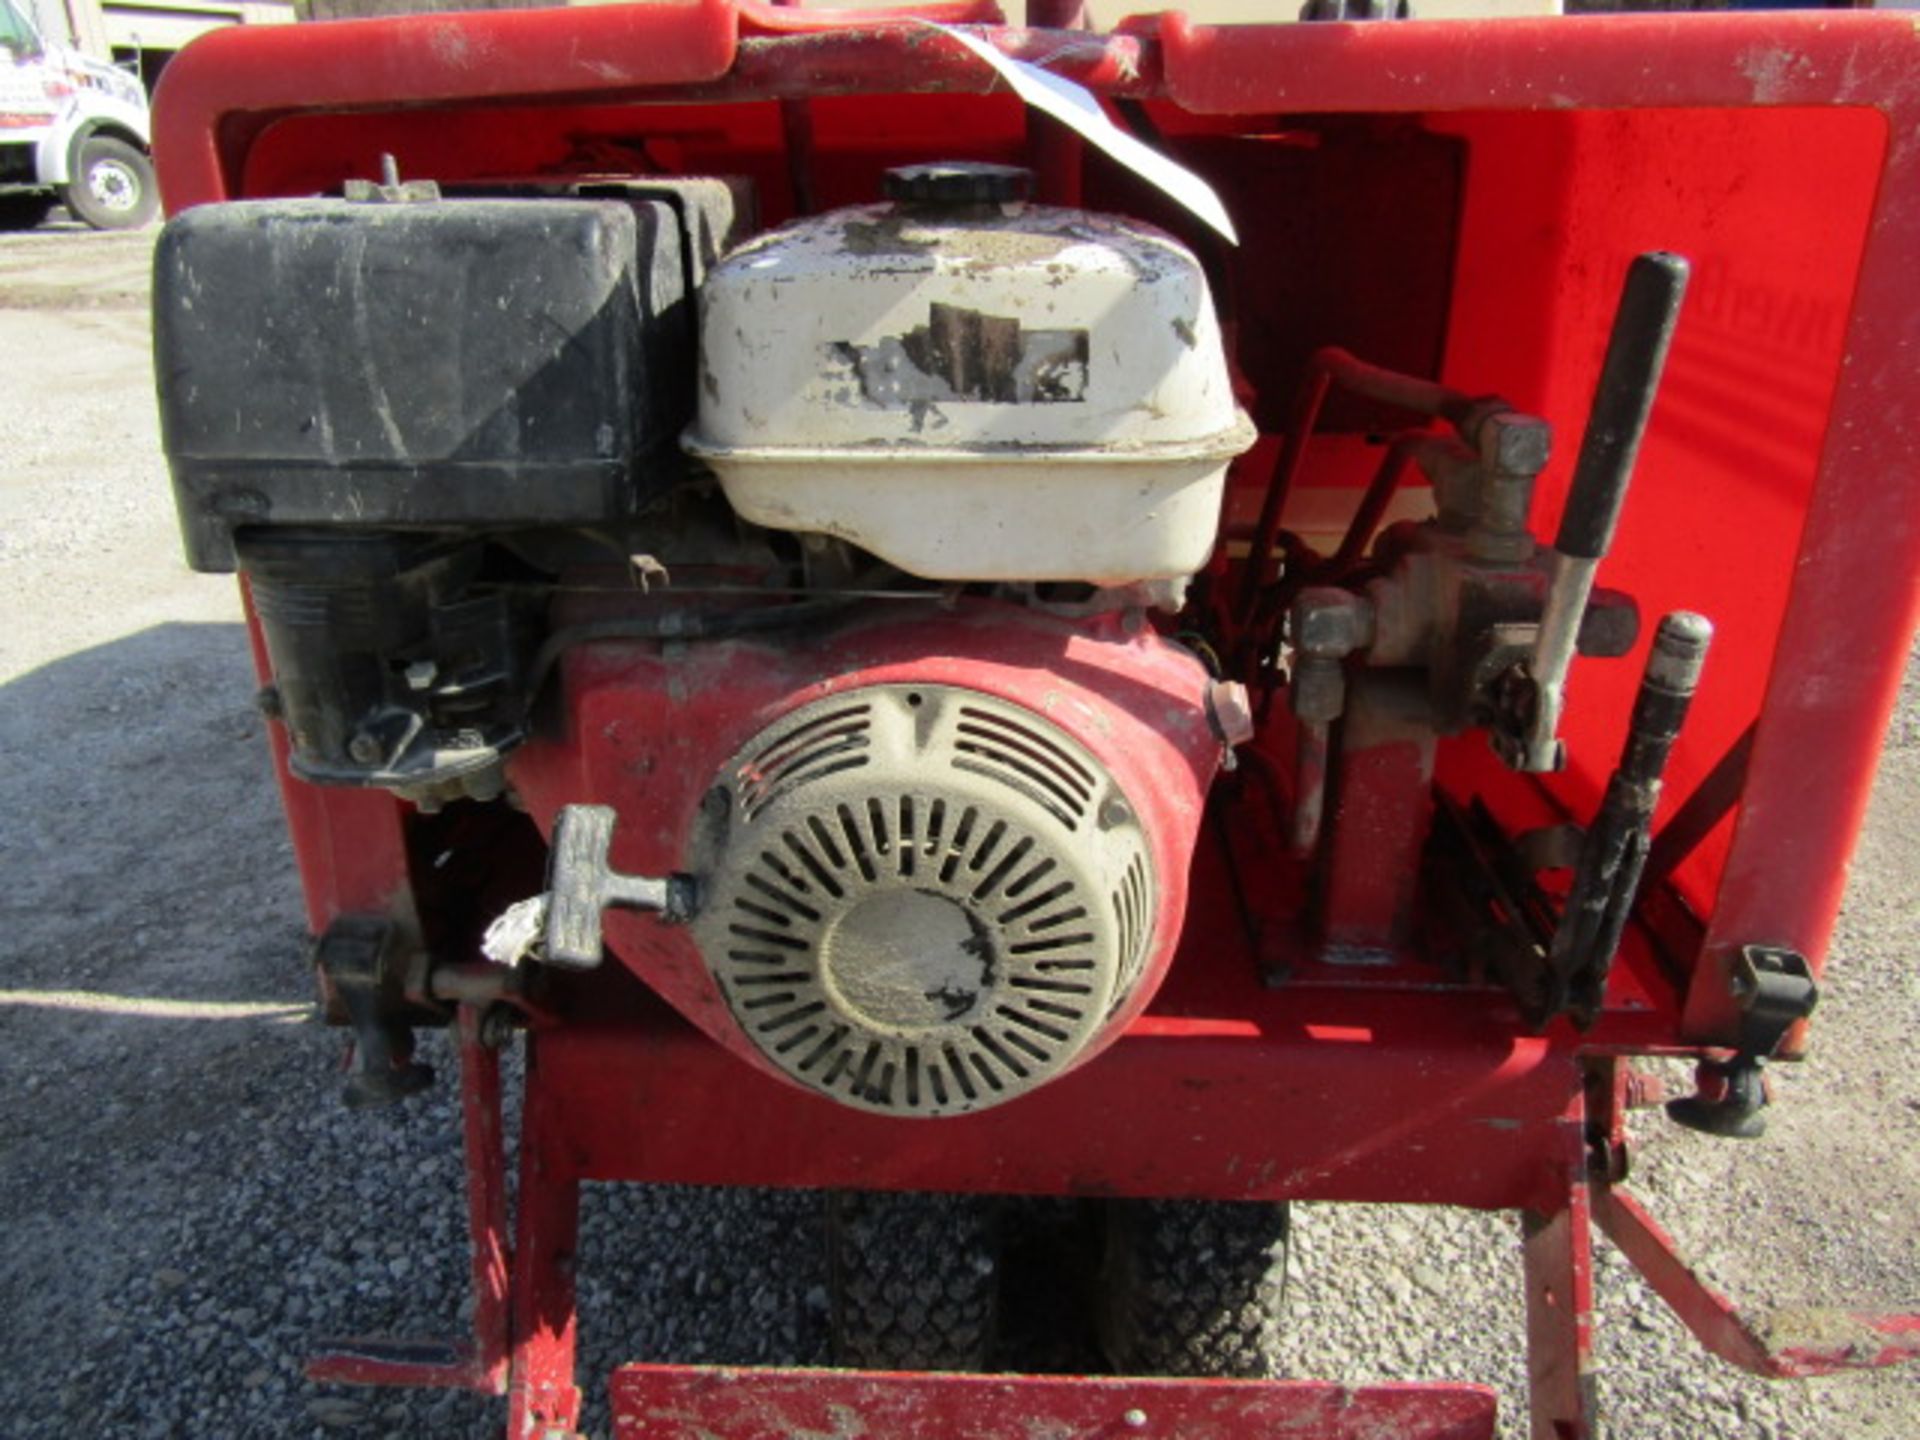 Whiteman Power Concrete Buggy, Model # OWAPB16R, Serial # 9606-36070, Located in Wildwood, MO - Image 5 of 6